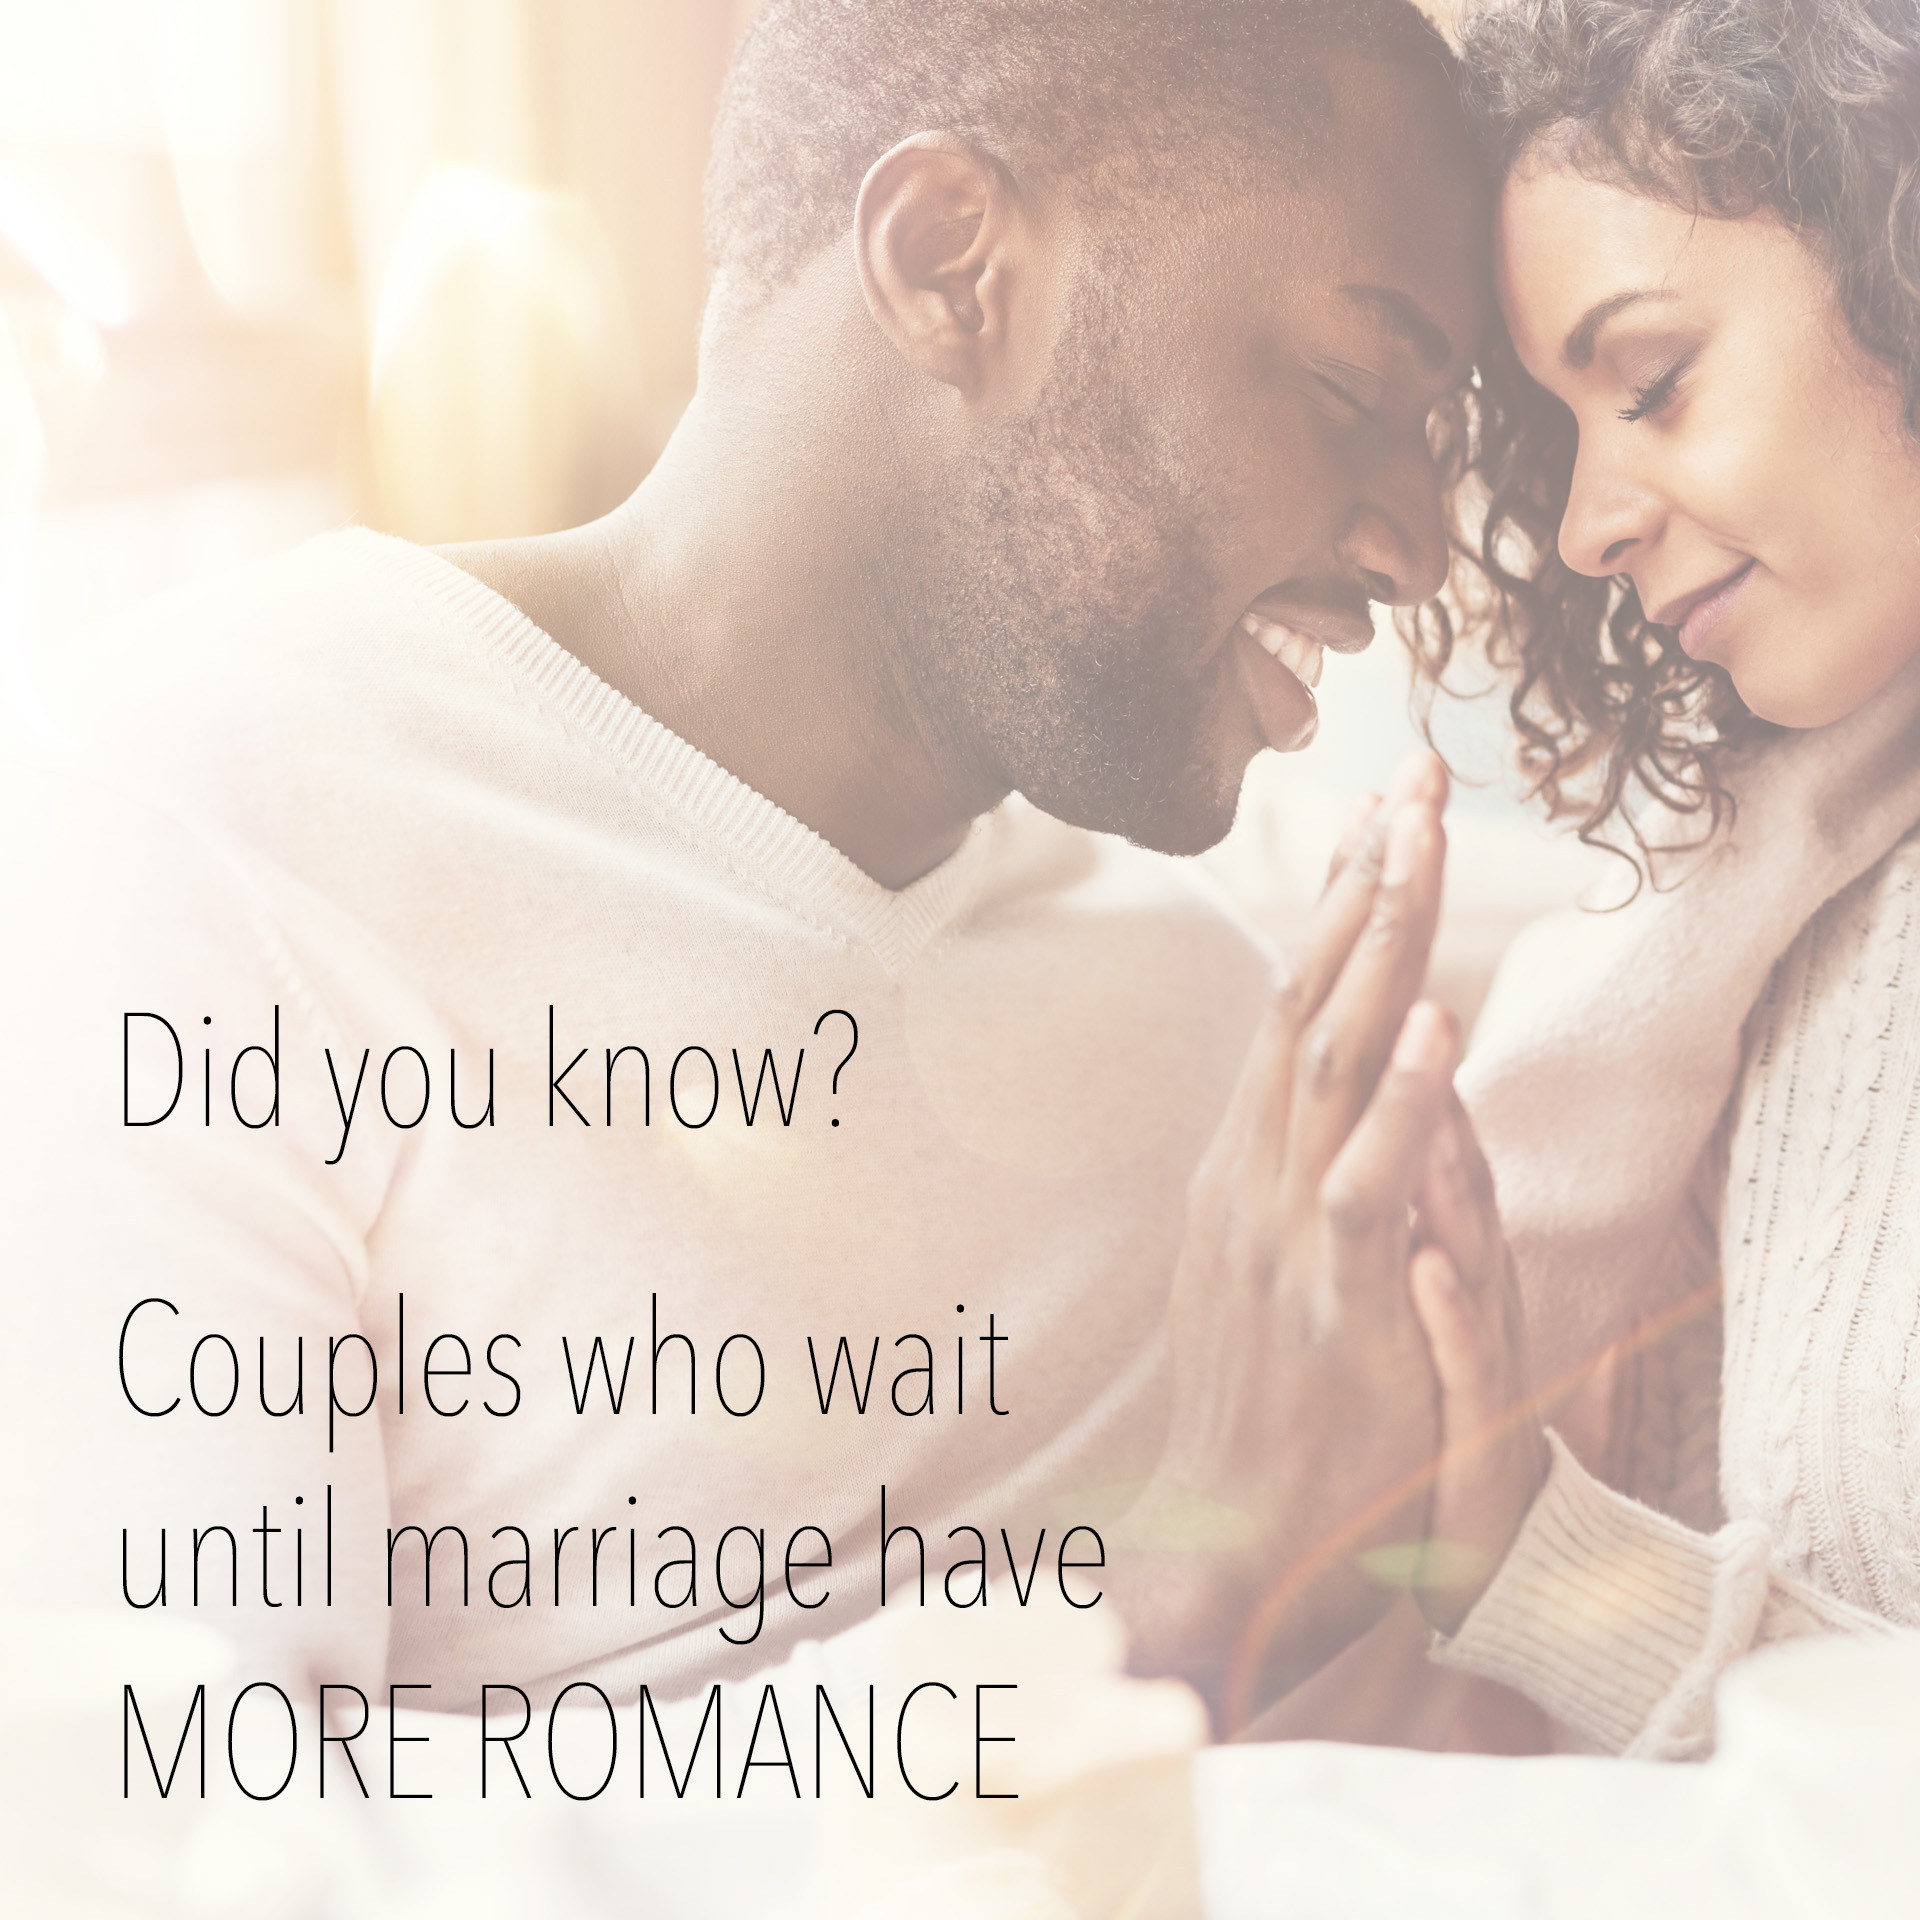 Did you know? Couples who wait until marriage have MORE ROMANCE